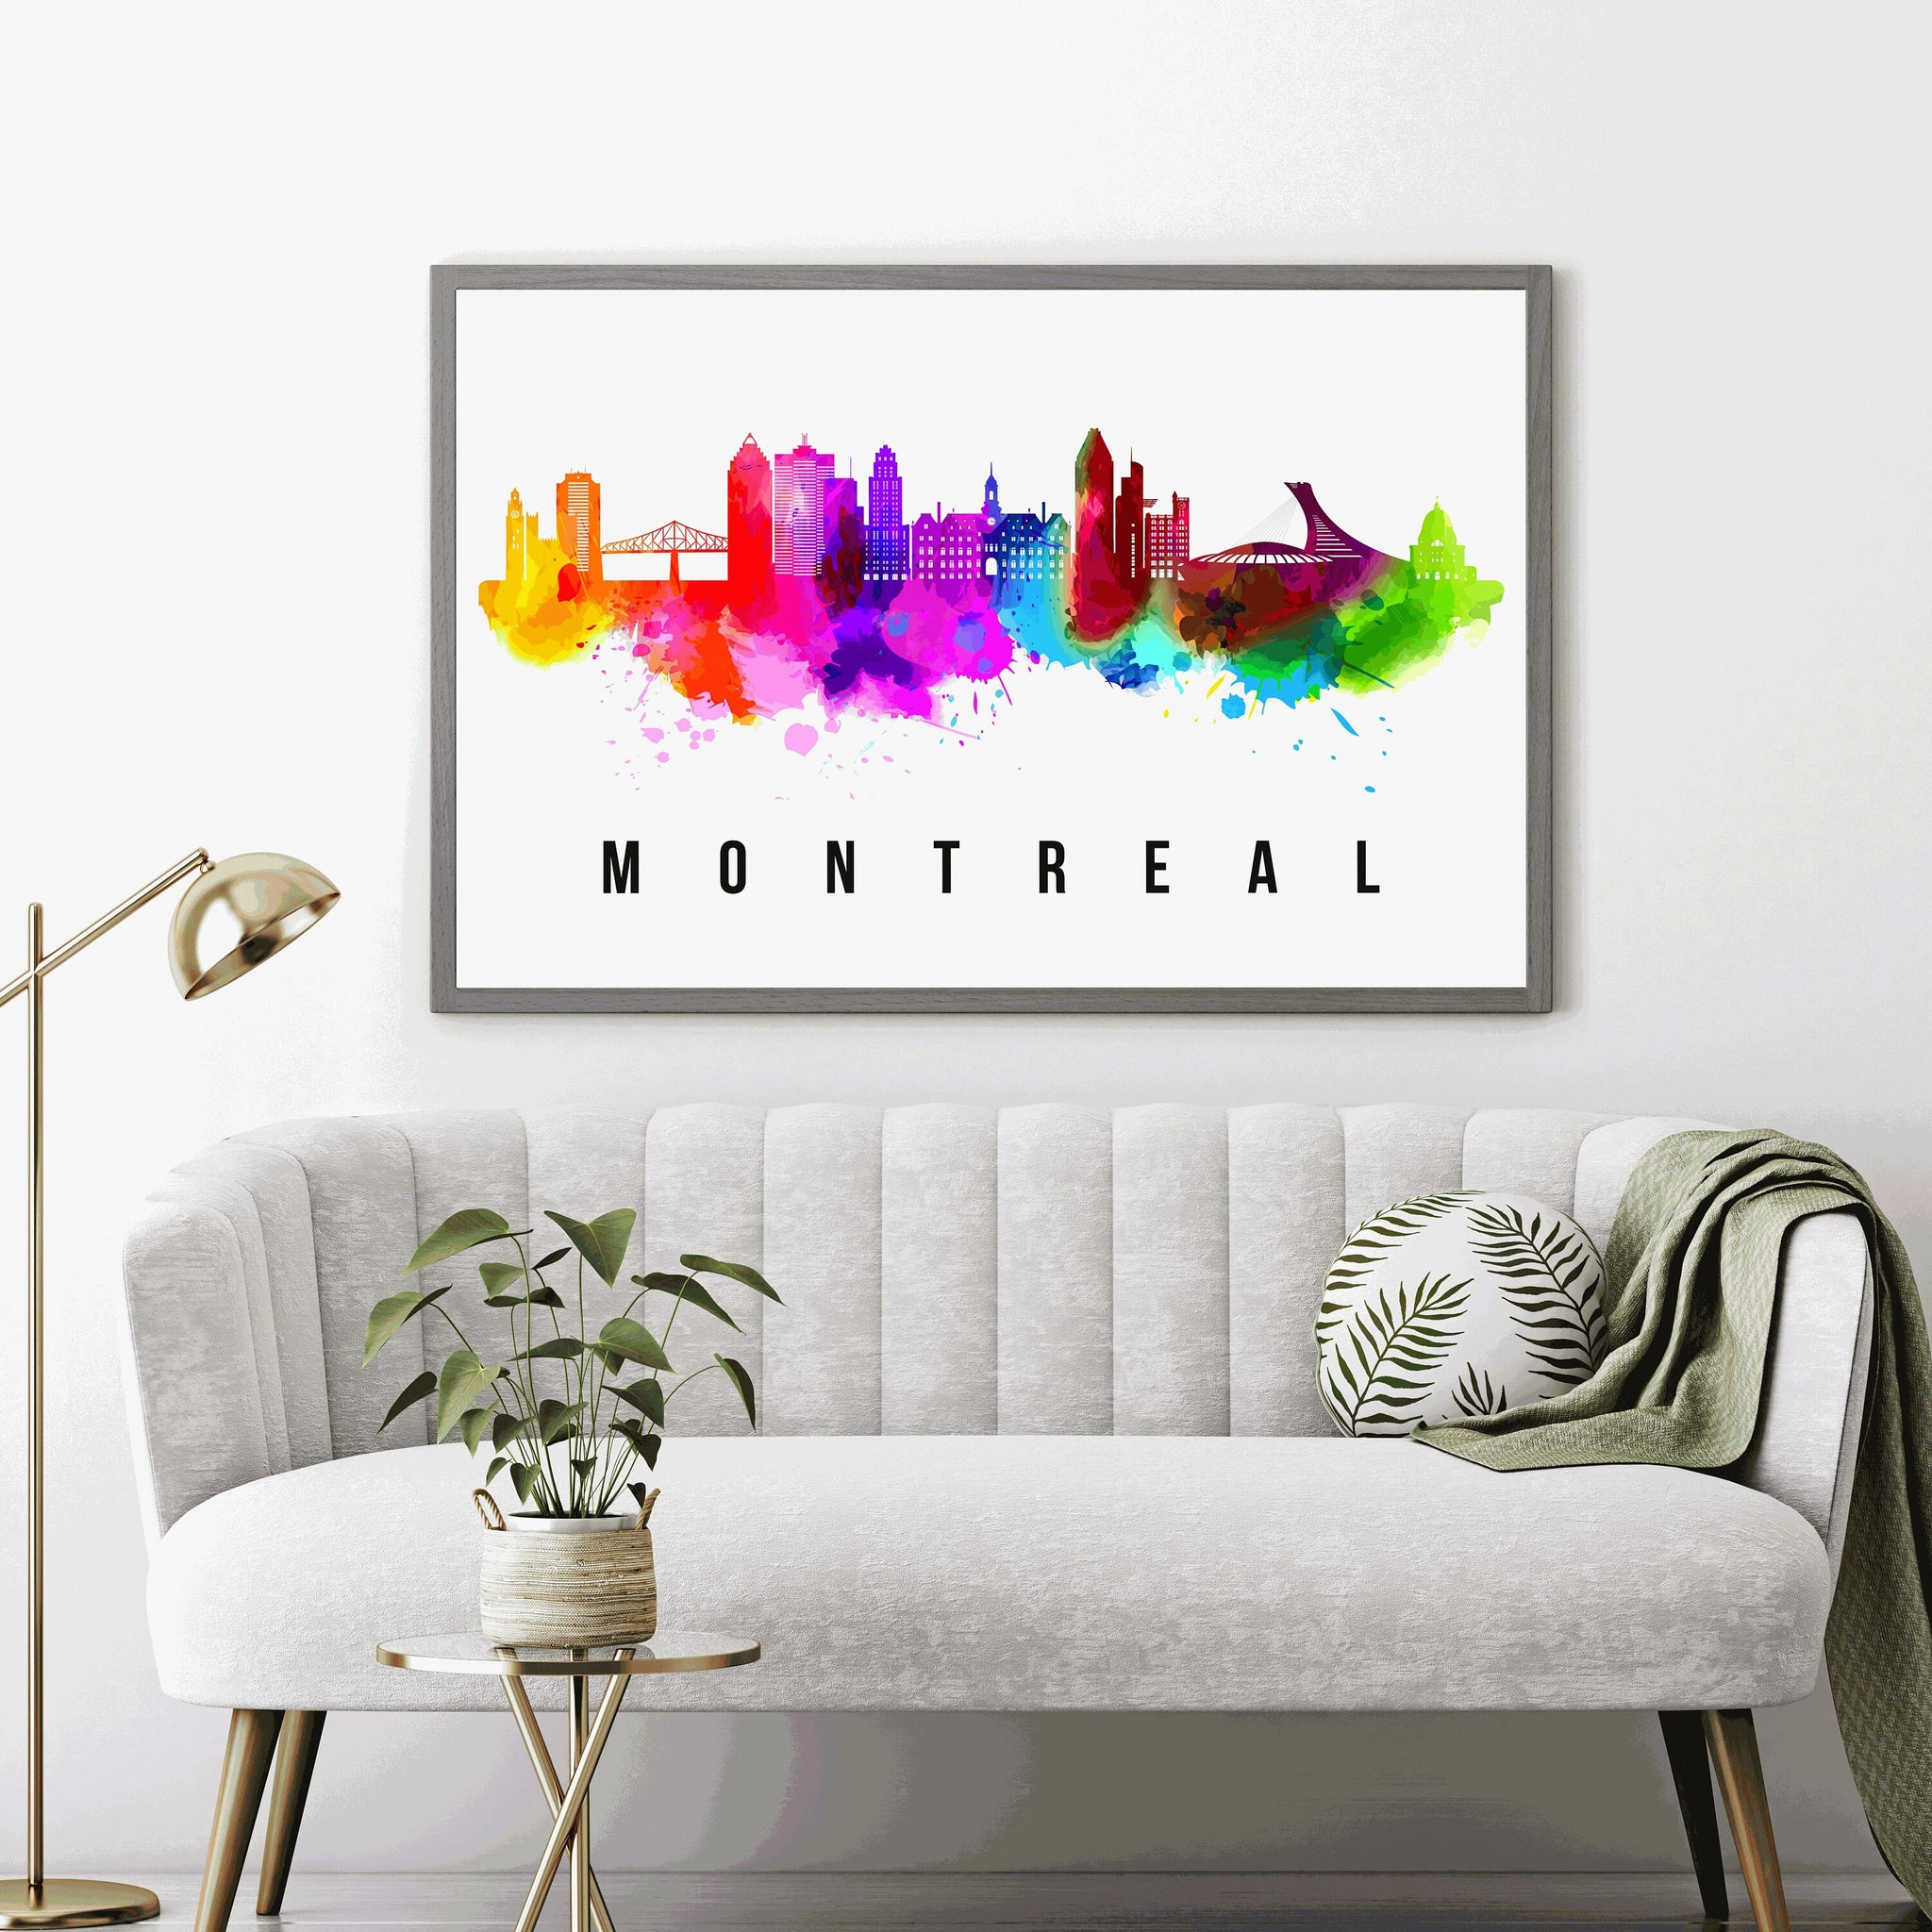 MONTREAL - CANADA Poster,  Skyline Poster Cityscape and Landmark Montreal Illustration Home Wall Art, Office Decor